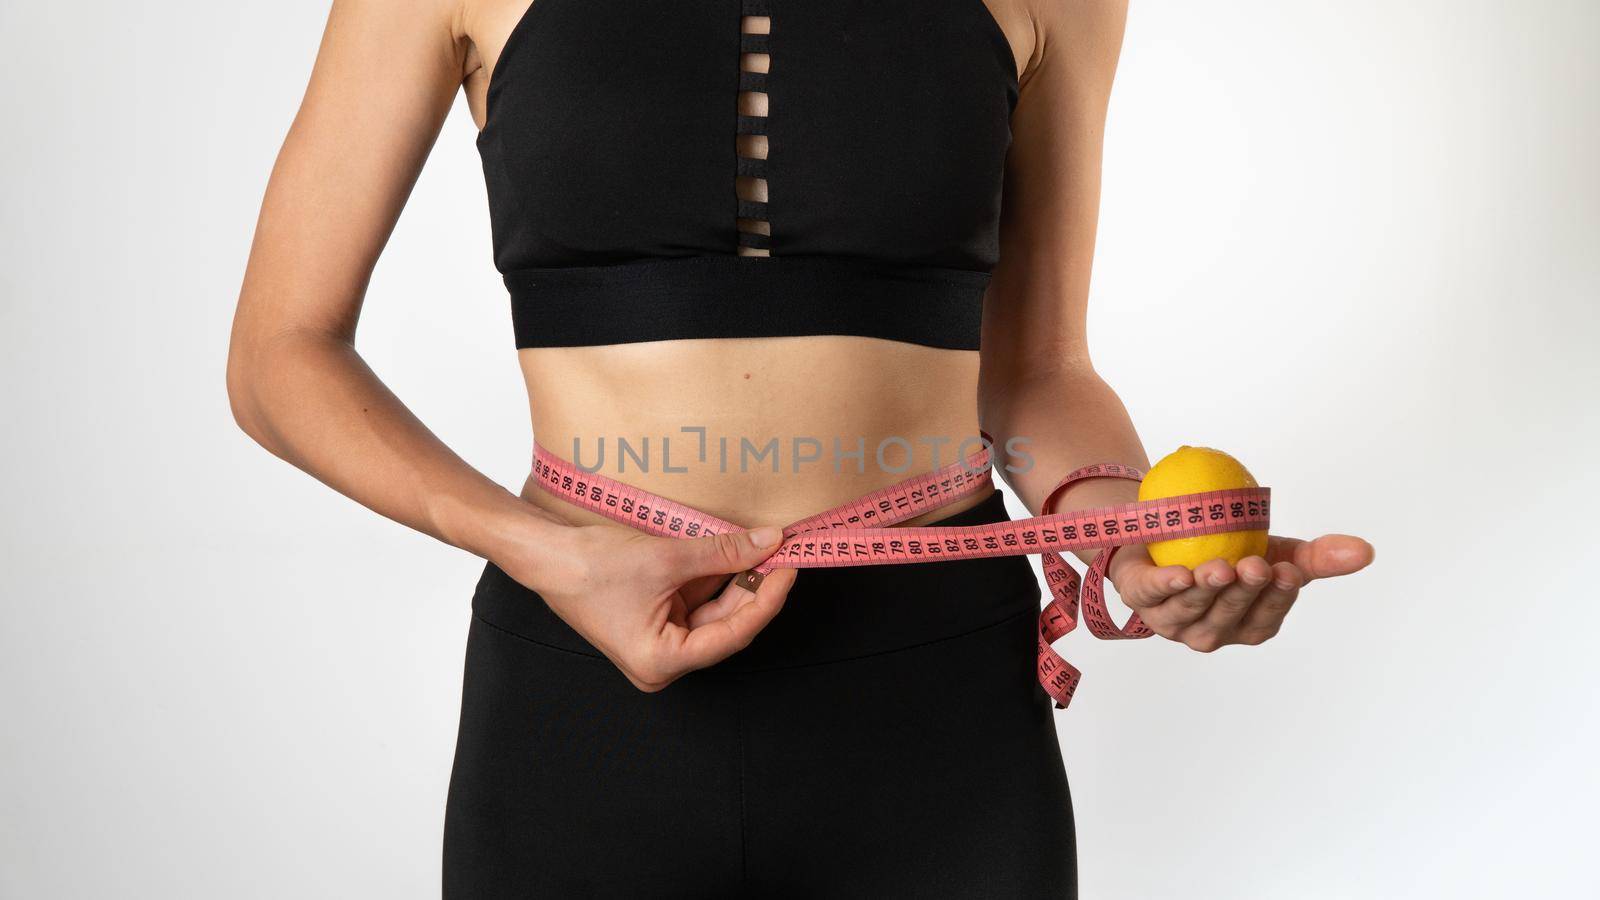 A woman measures the figure with a ribbon, a lemon in her hand - weight loss, healthy eating and sports. High quality photo